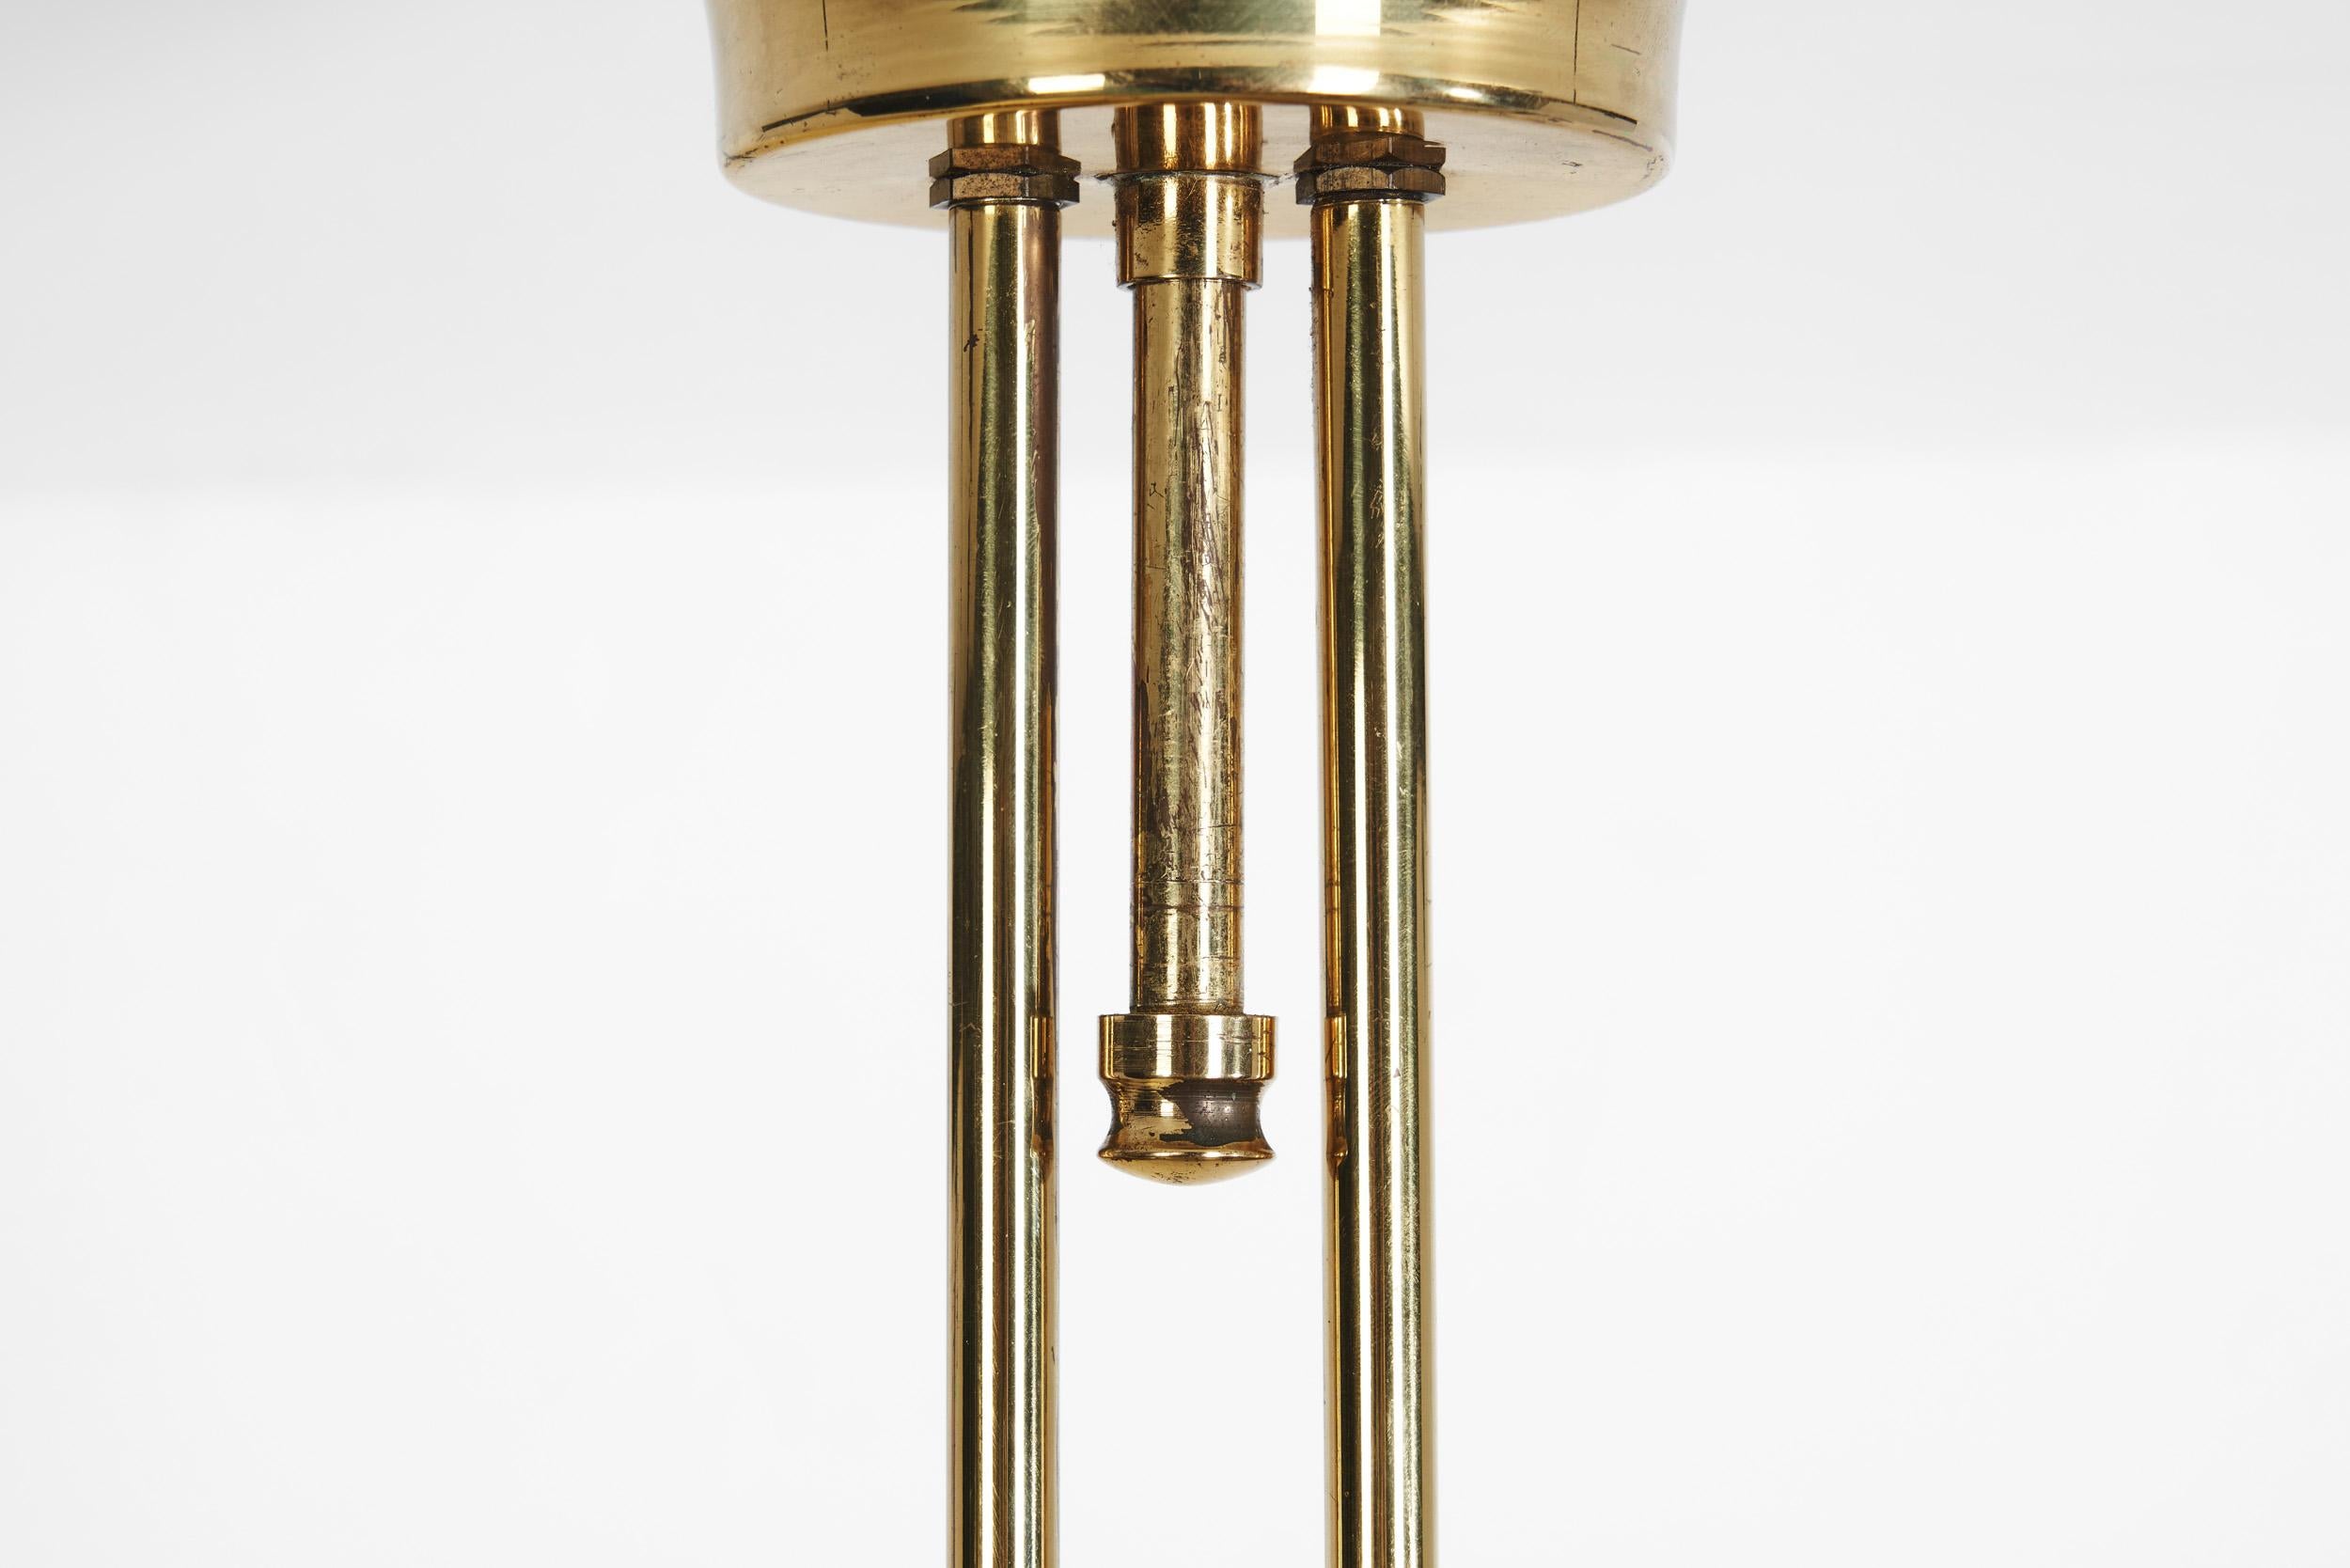 Brass Ceiling Lamp with Decorative Cylindrical Glass Shades, Europe Ca 1950s For Sale 4